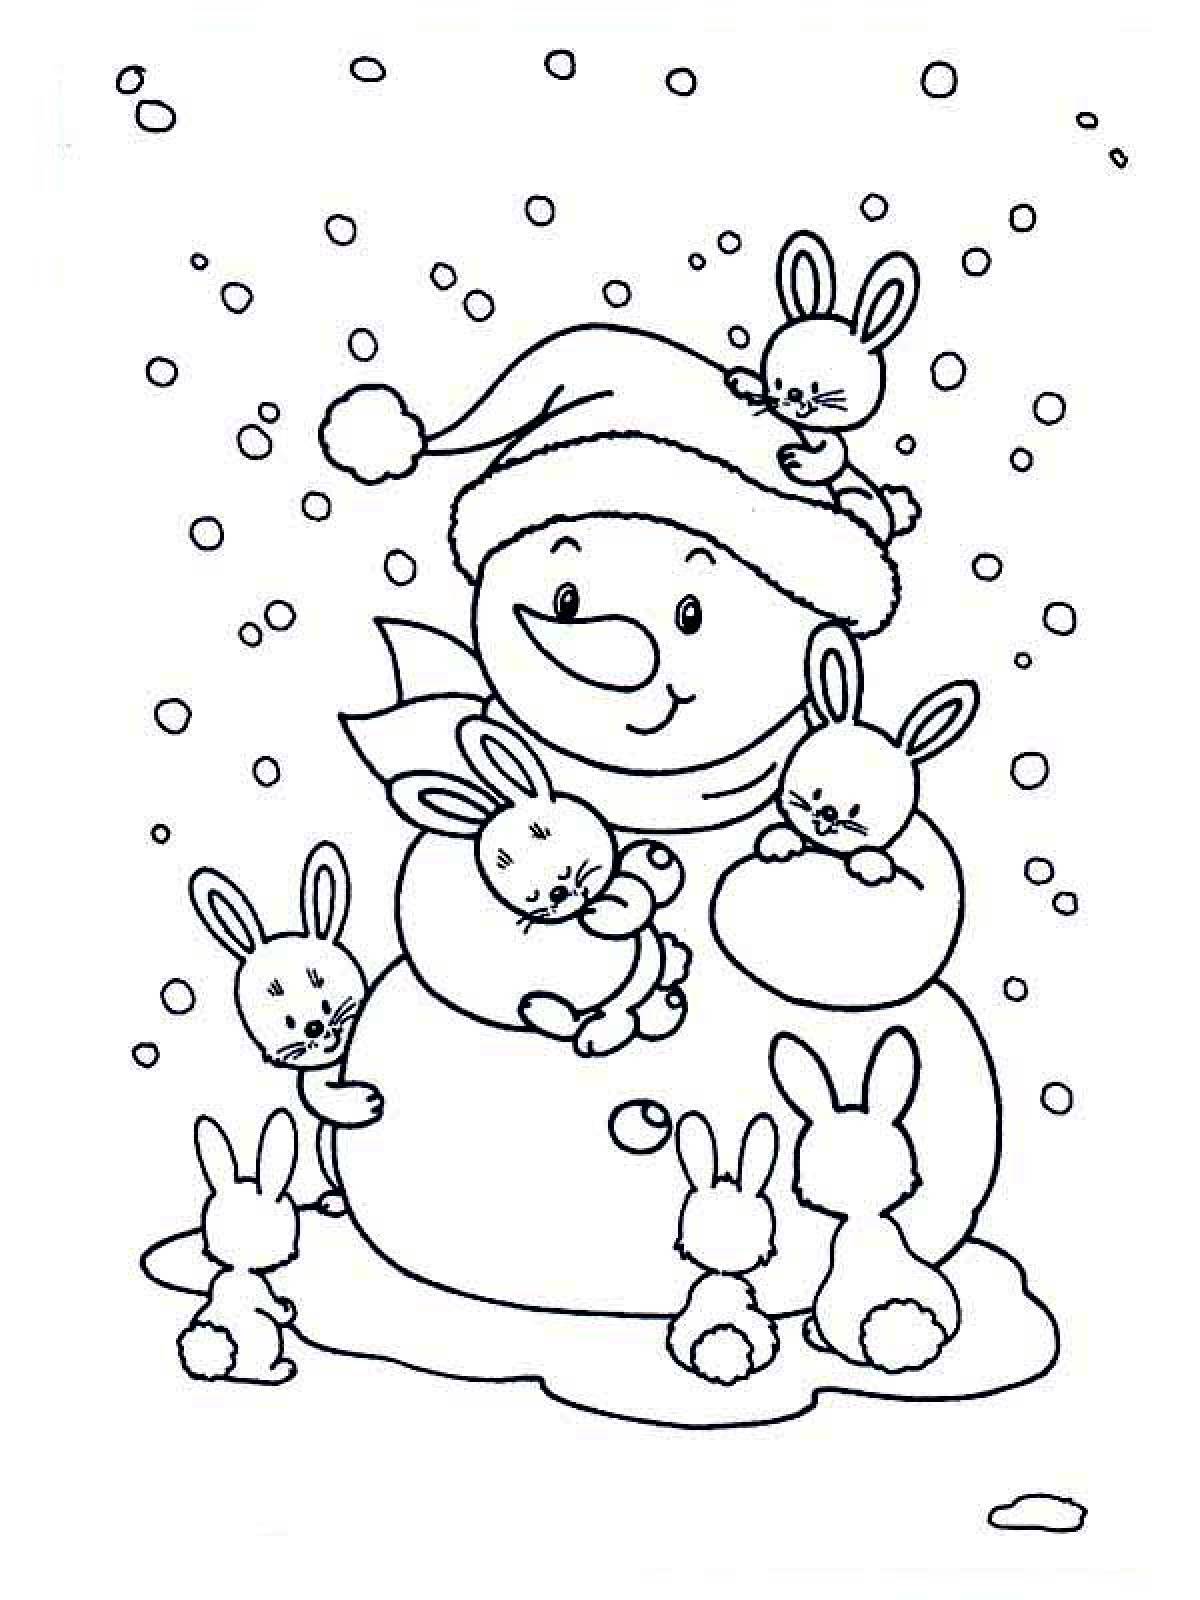 Snowman and hares